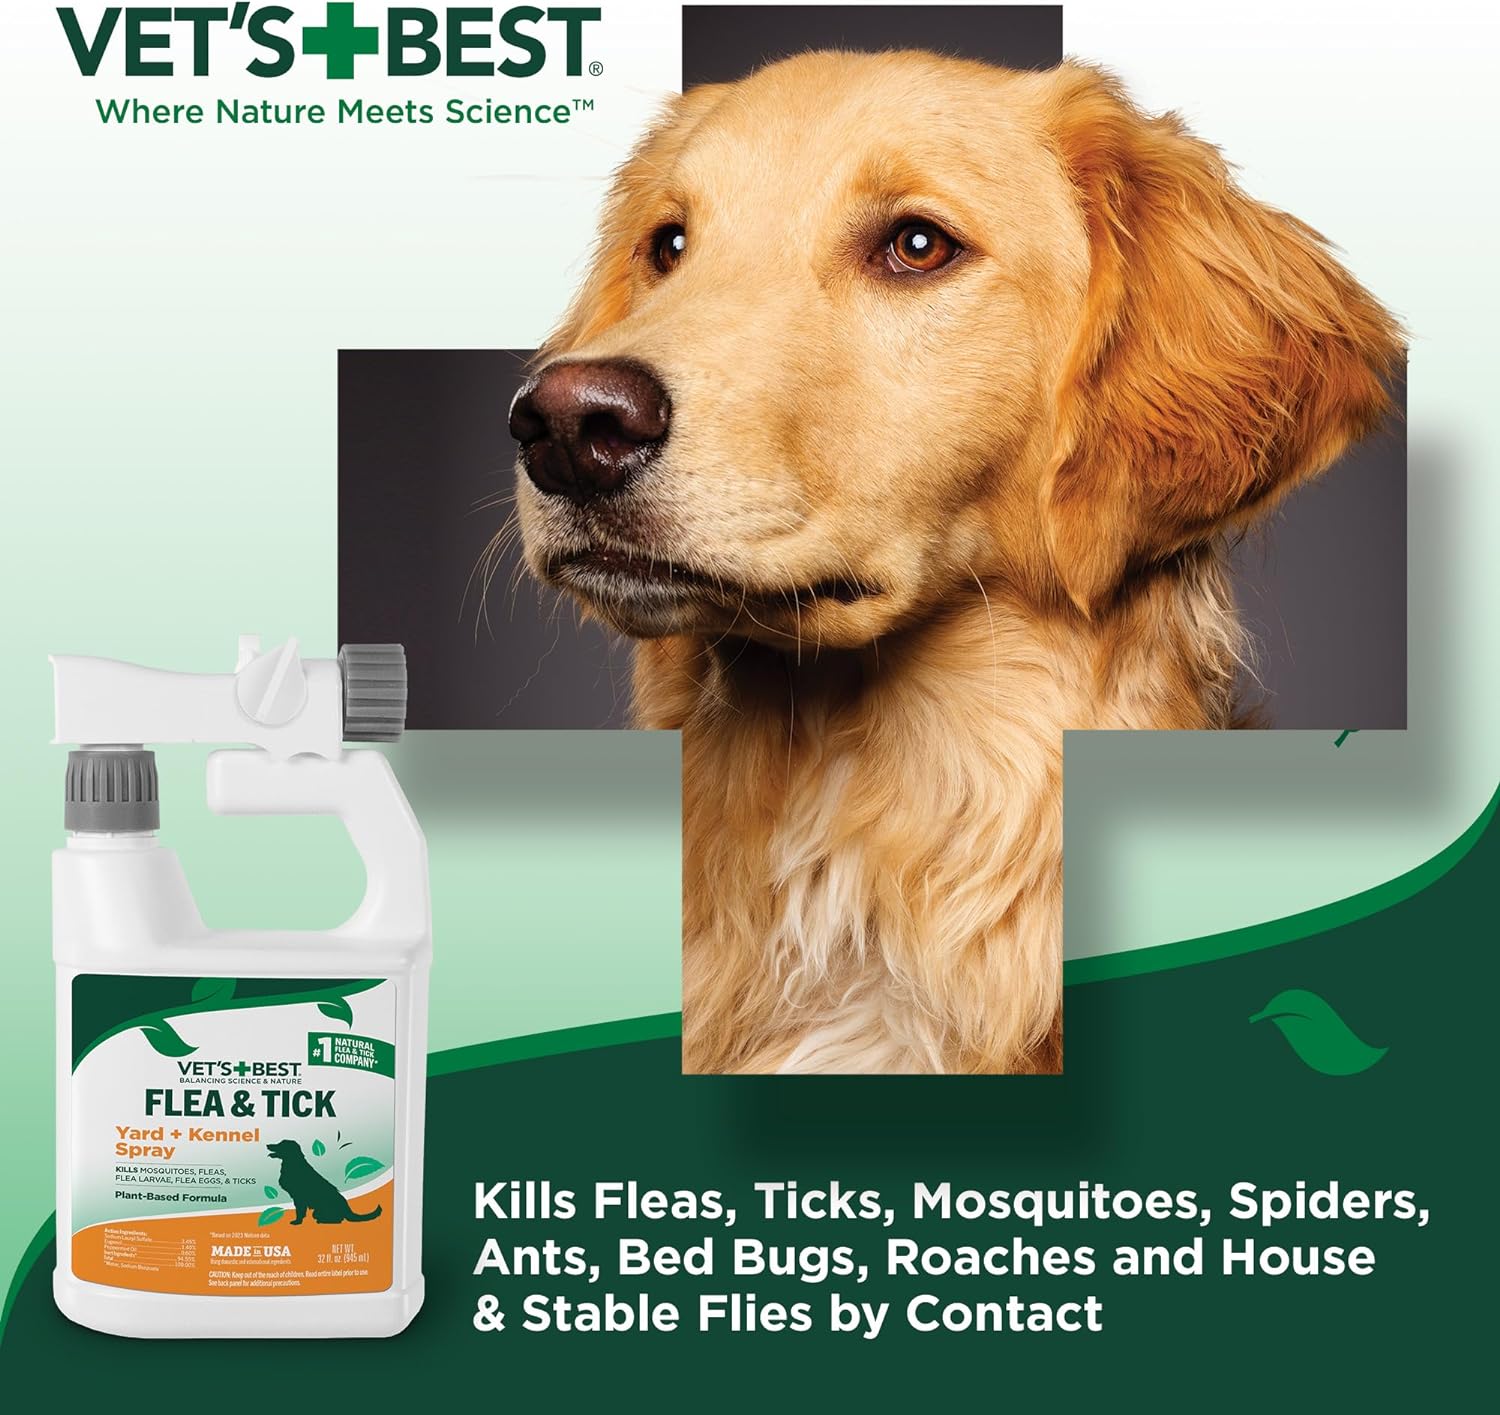 Vet's Best Flea and Tick Yard and Kennel Spray - kills Mosquitoes with Certified Natural Oils - Plant Safe with Ready-to-Use Hose Attachment - 32 oz : Pest Control Carpet Sprays : Pet Supplies